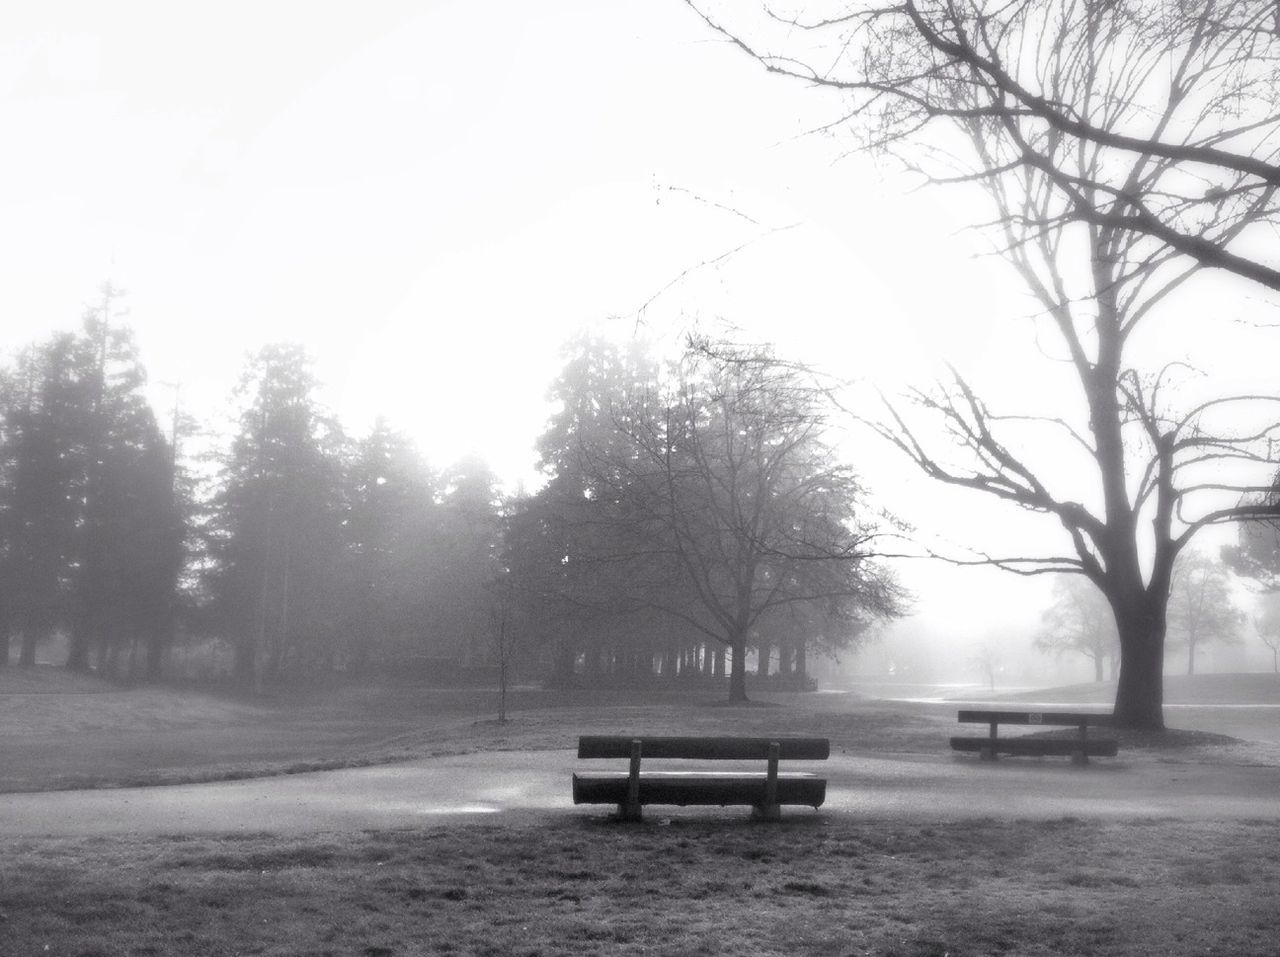 Empty bench at park against trees